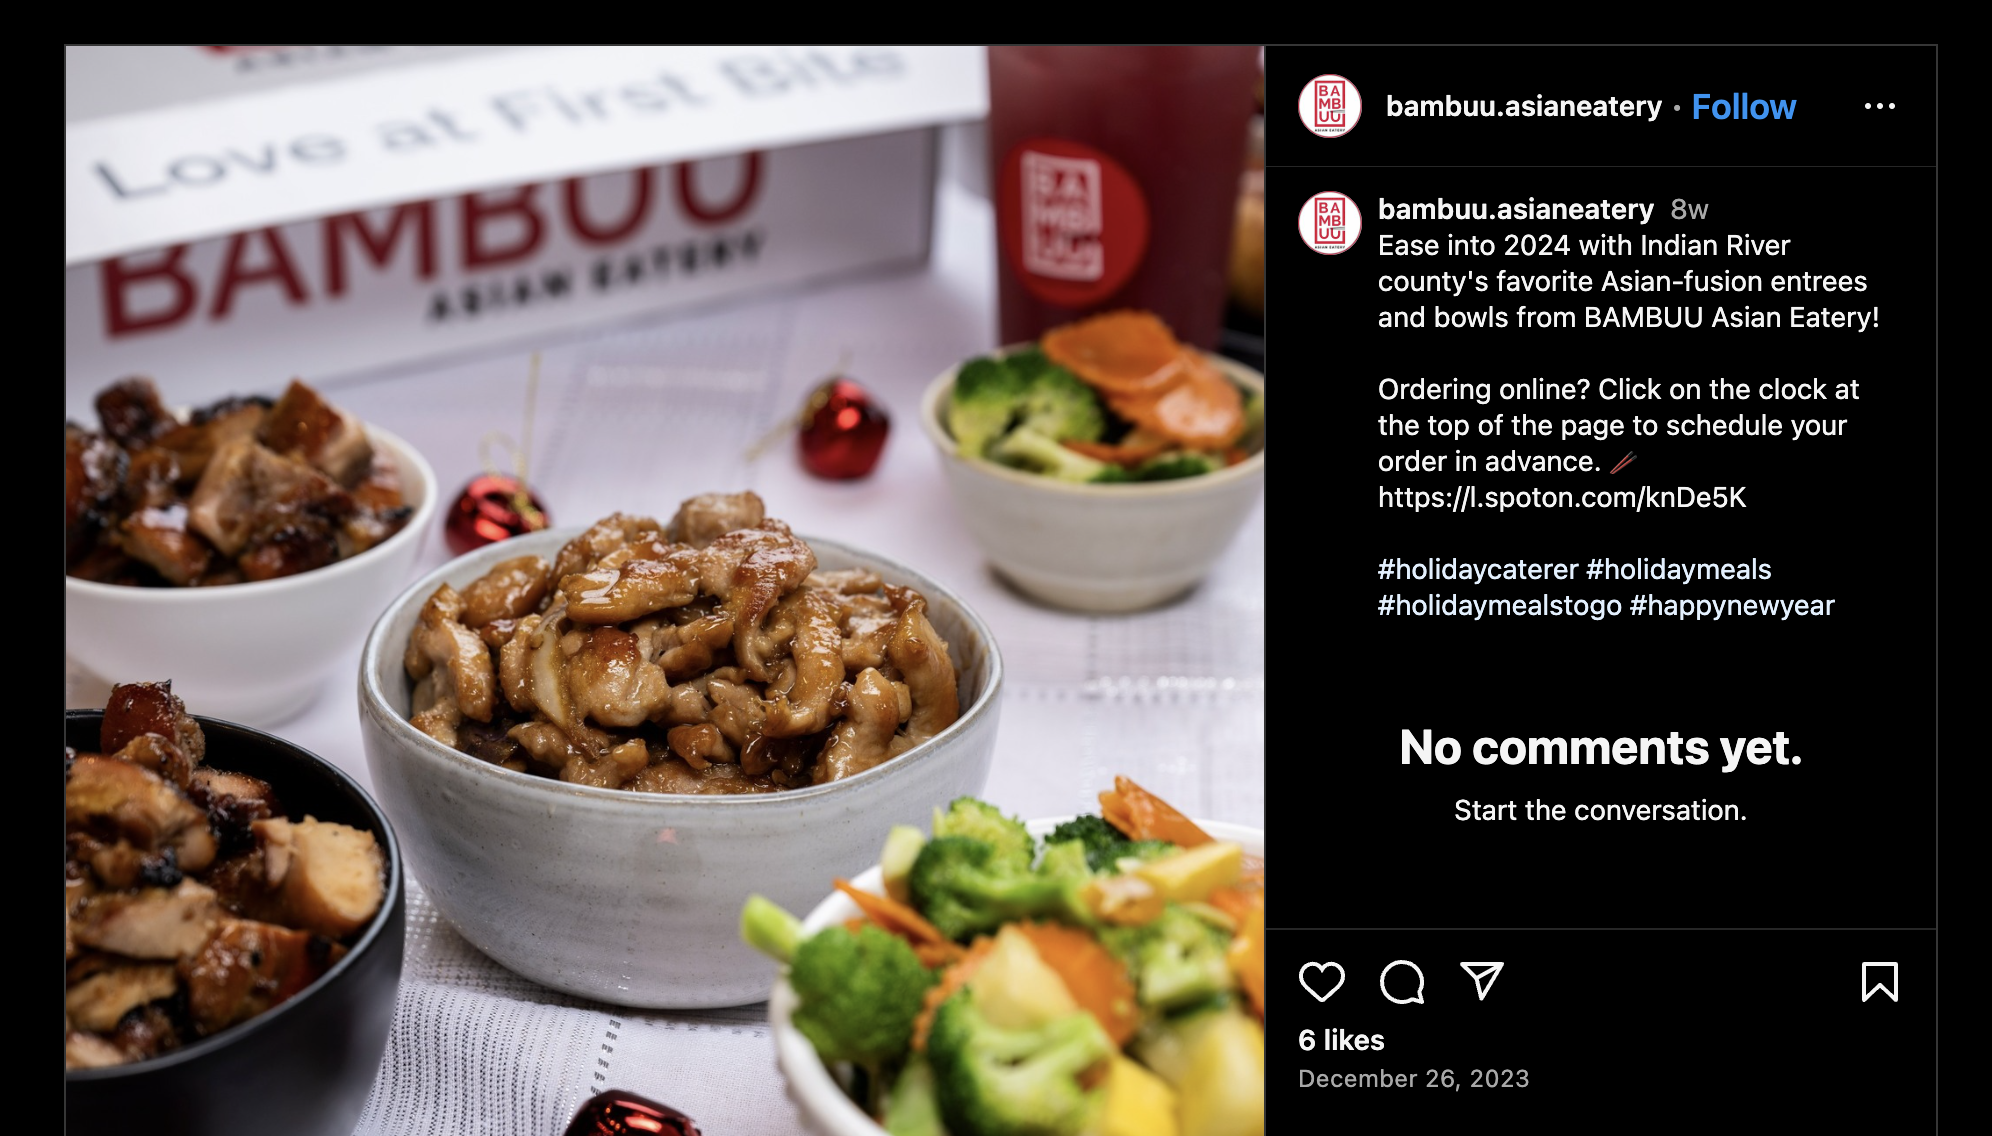 Bambuu Asian Eatery's Instagram post promoting online ordering.